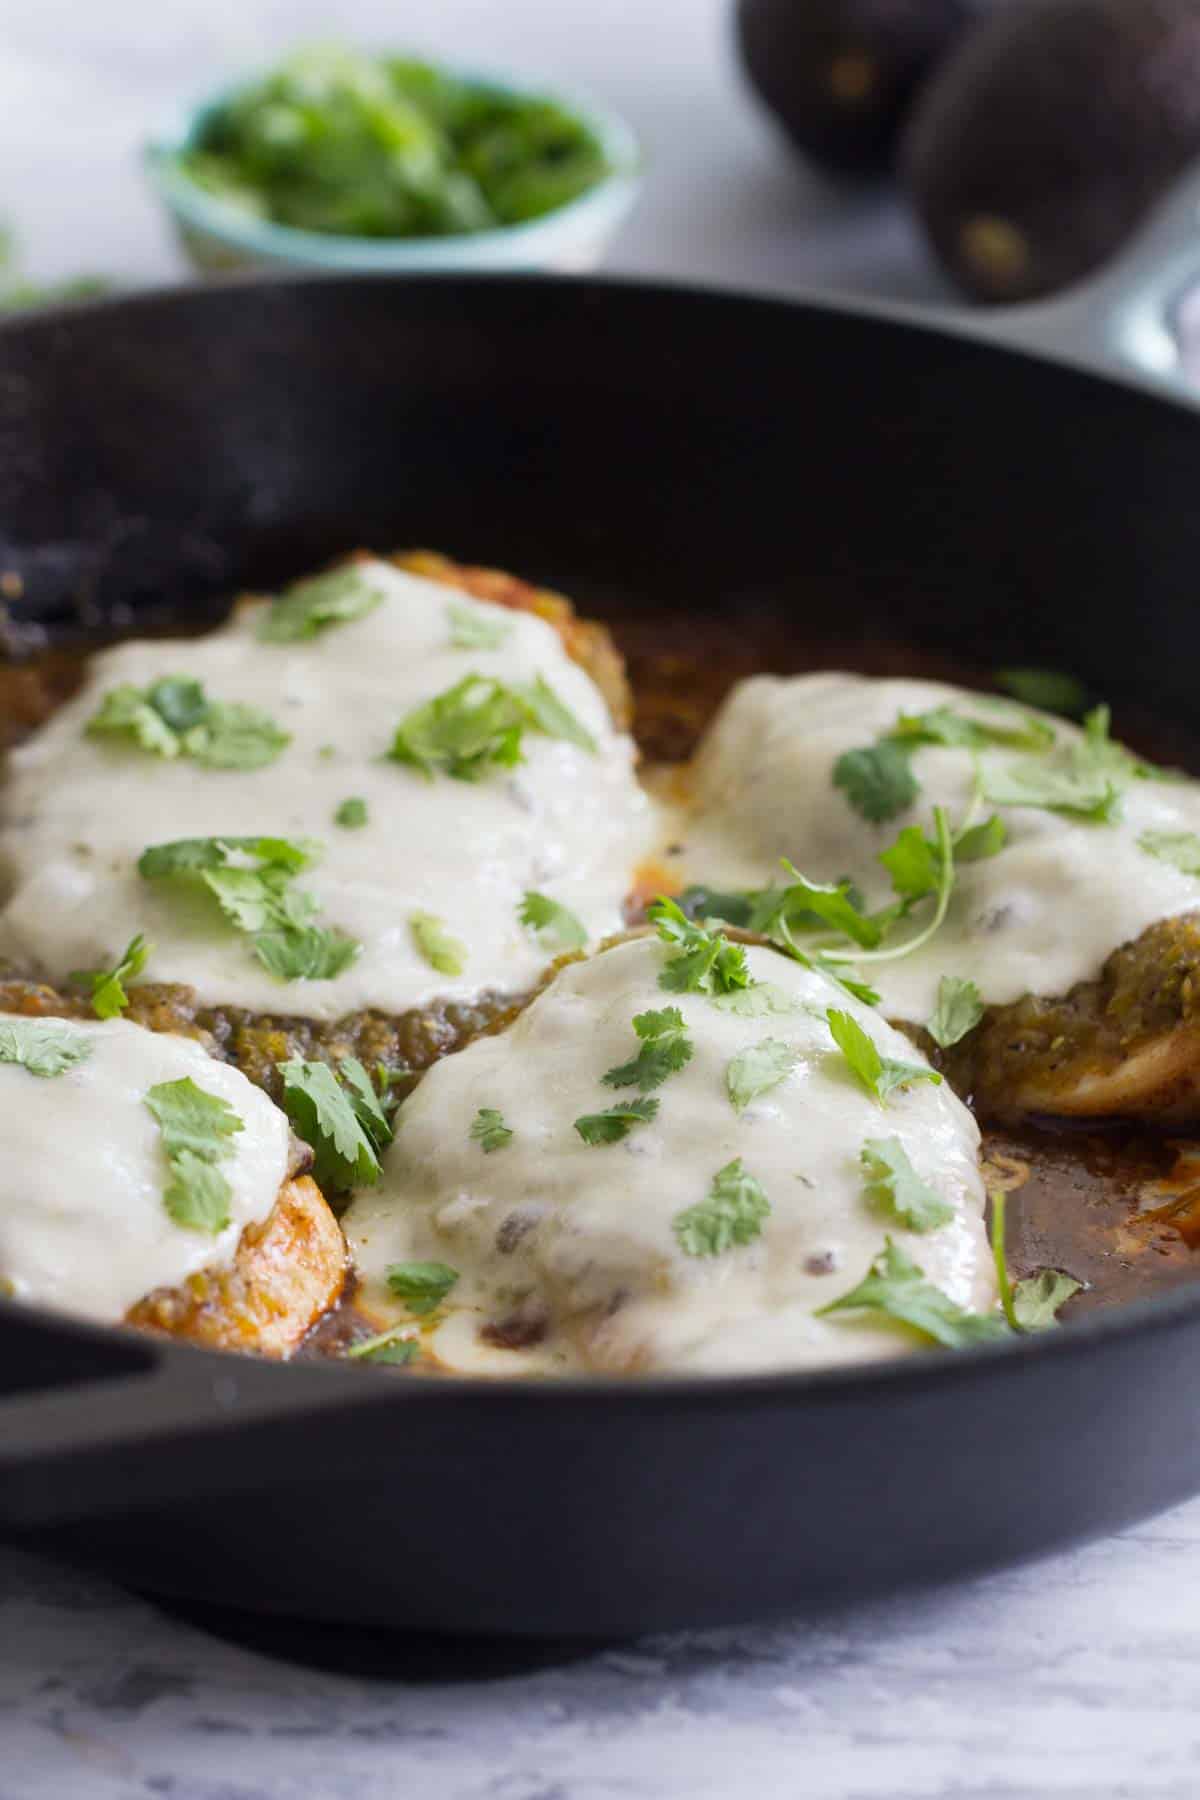 Skillet with Salsa Verde Chicken topped with cheese.